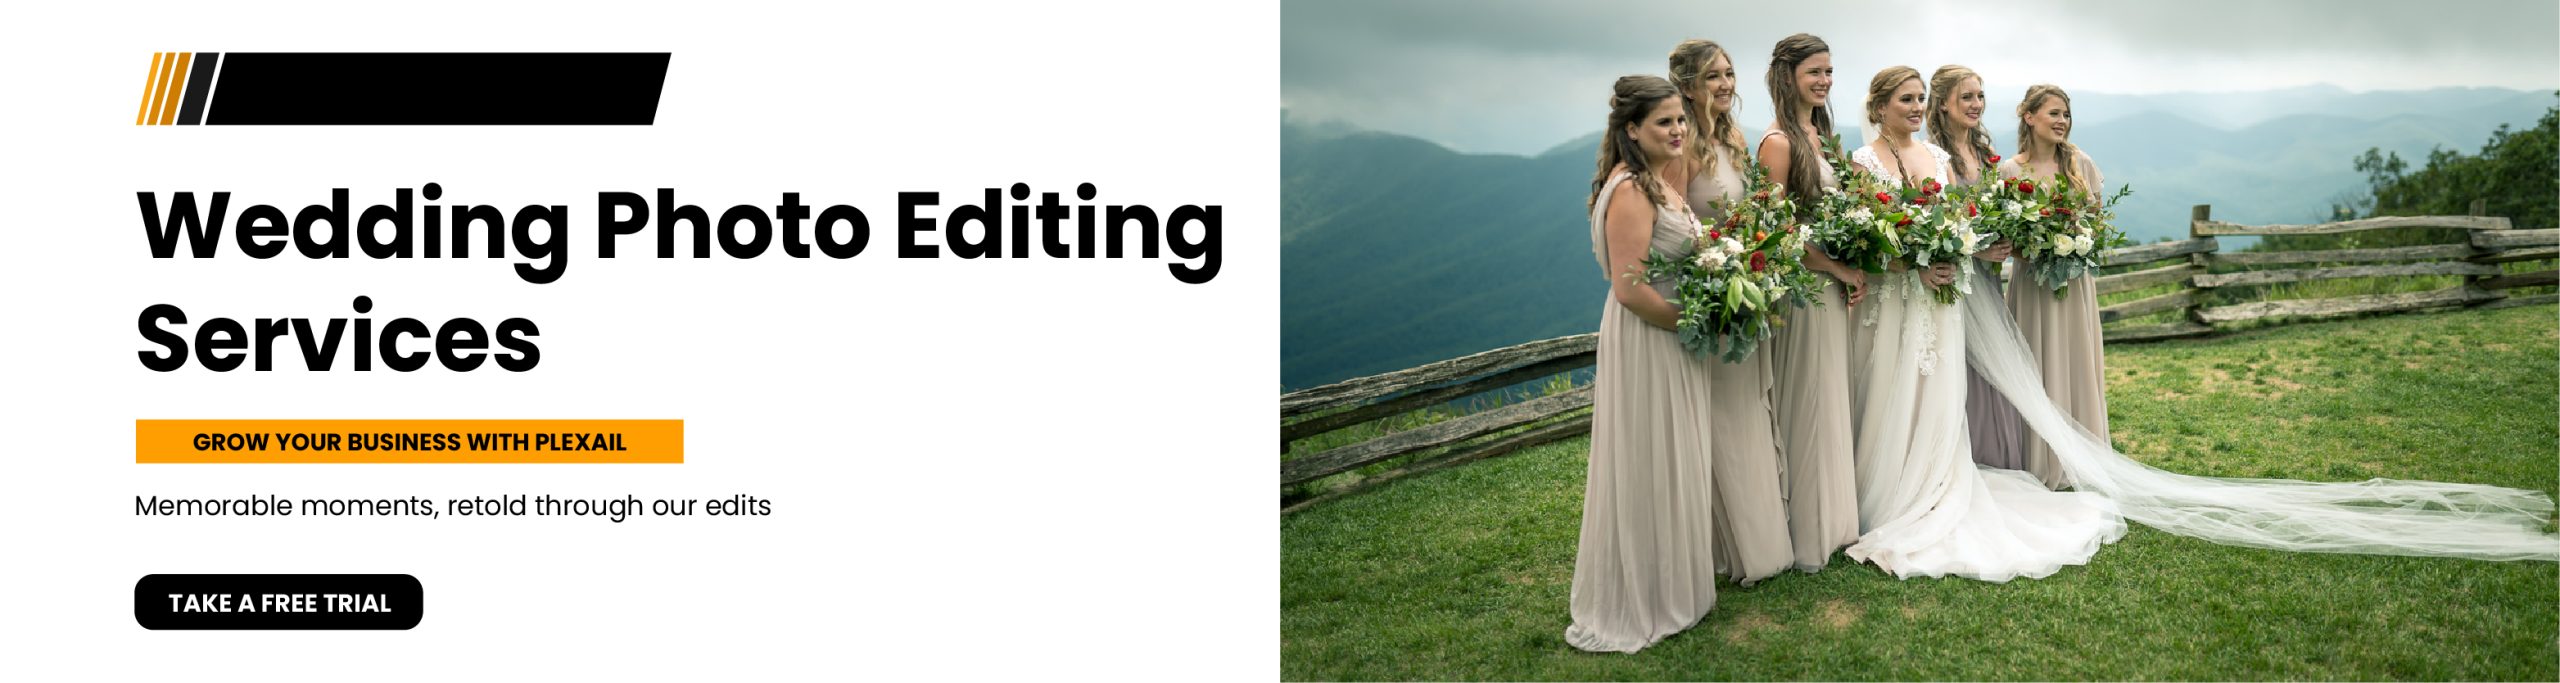 online wedding photo editing services in usa